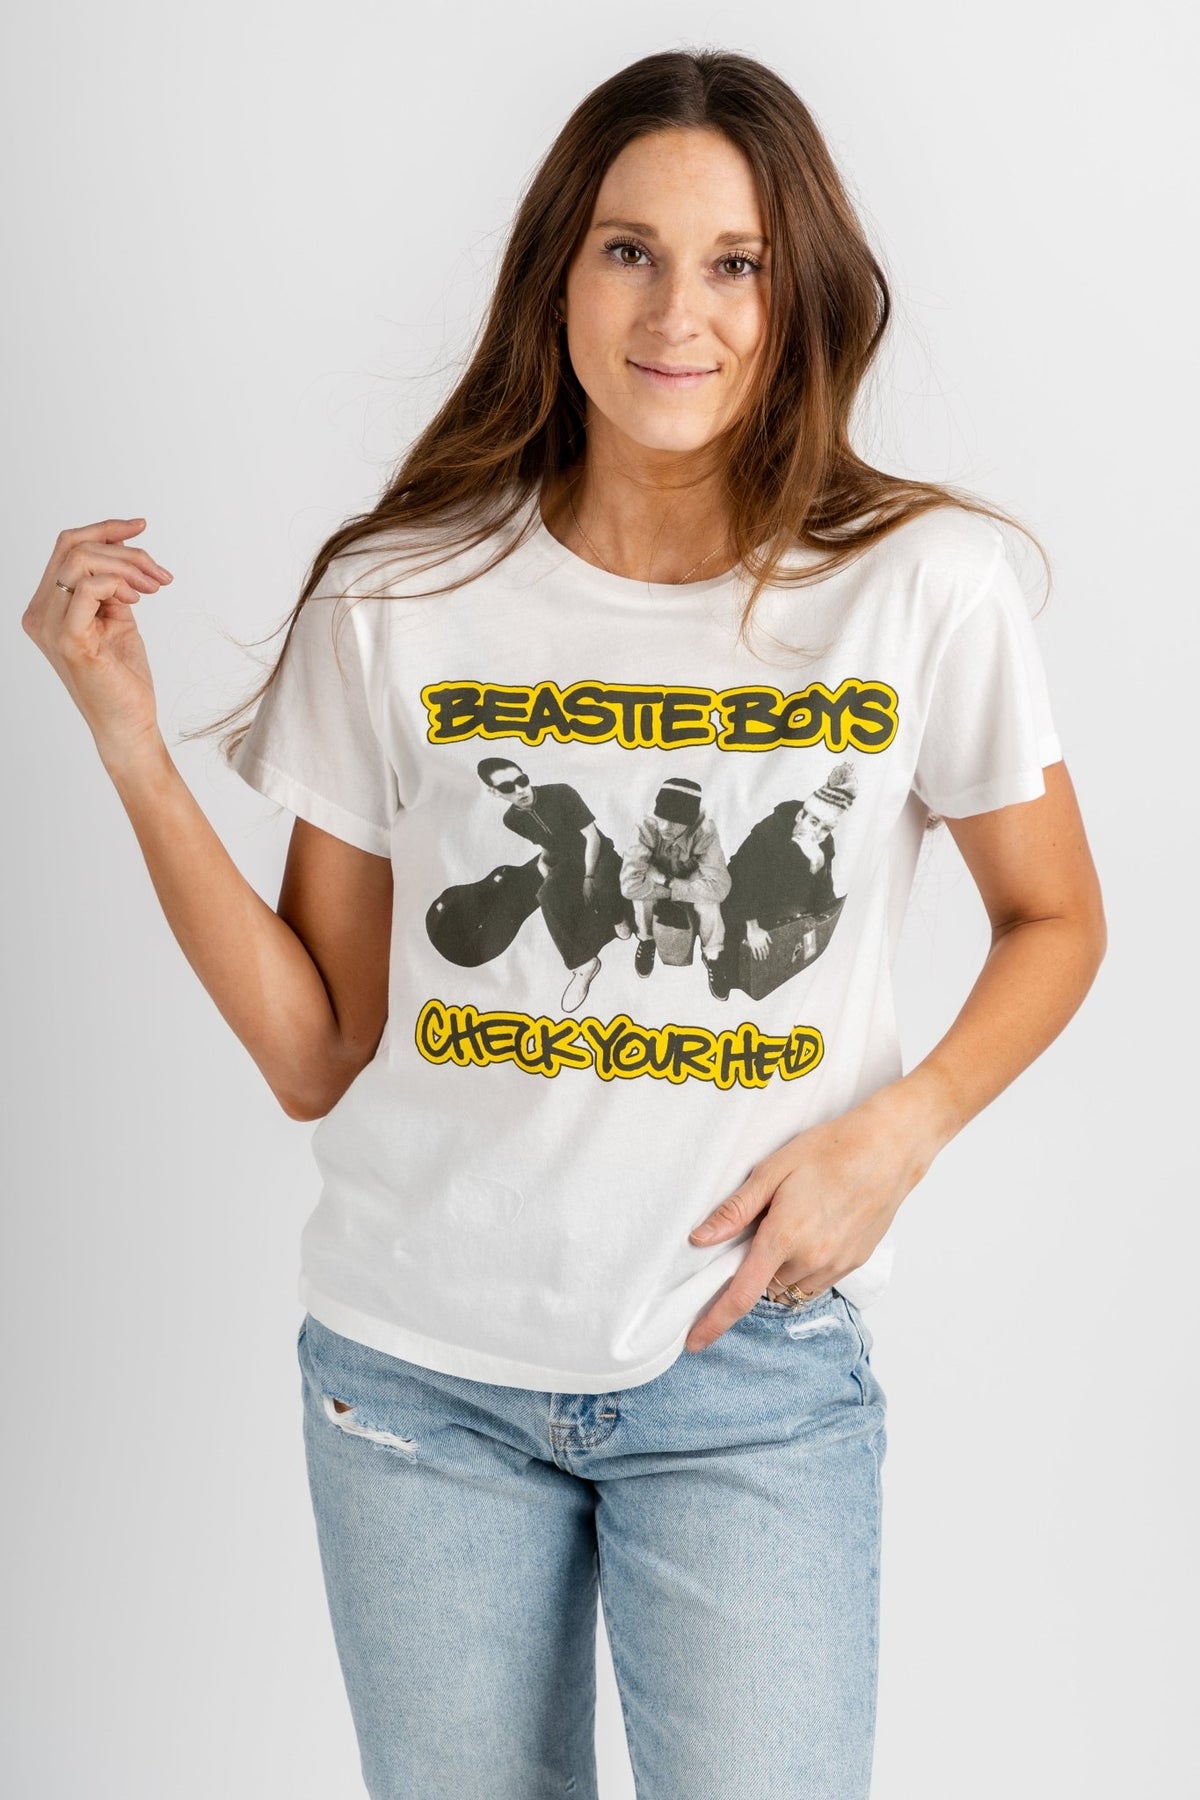 DayDreamer Beastie Boys Check Head tee vintage white - DayDreamer Graphic Band Tees at Lush Fashion Lounge Trendy Boutique in Oklahoma City